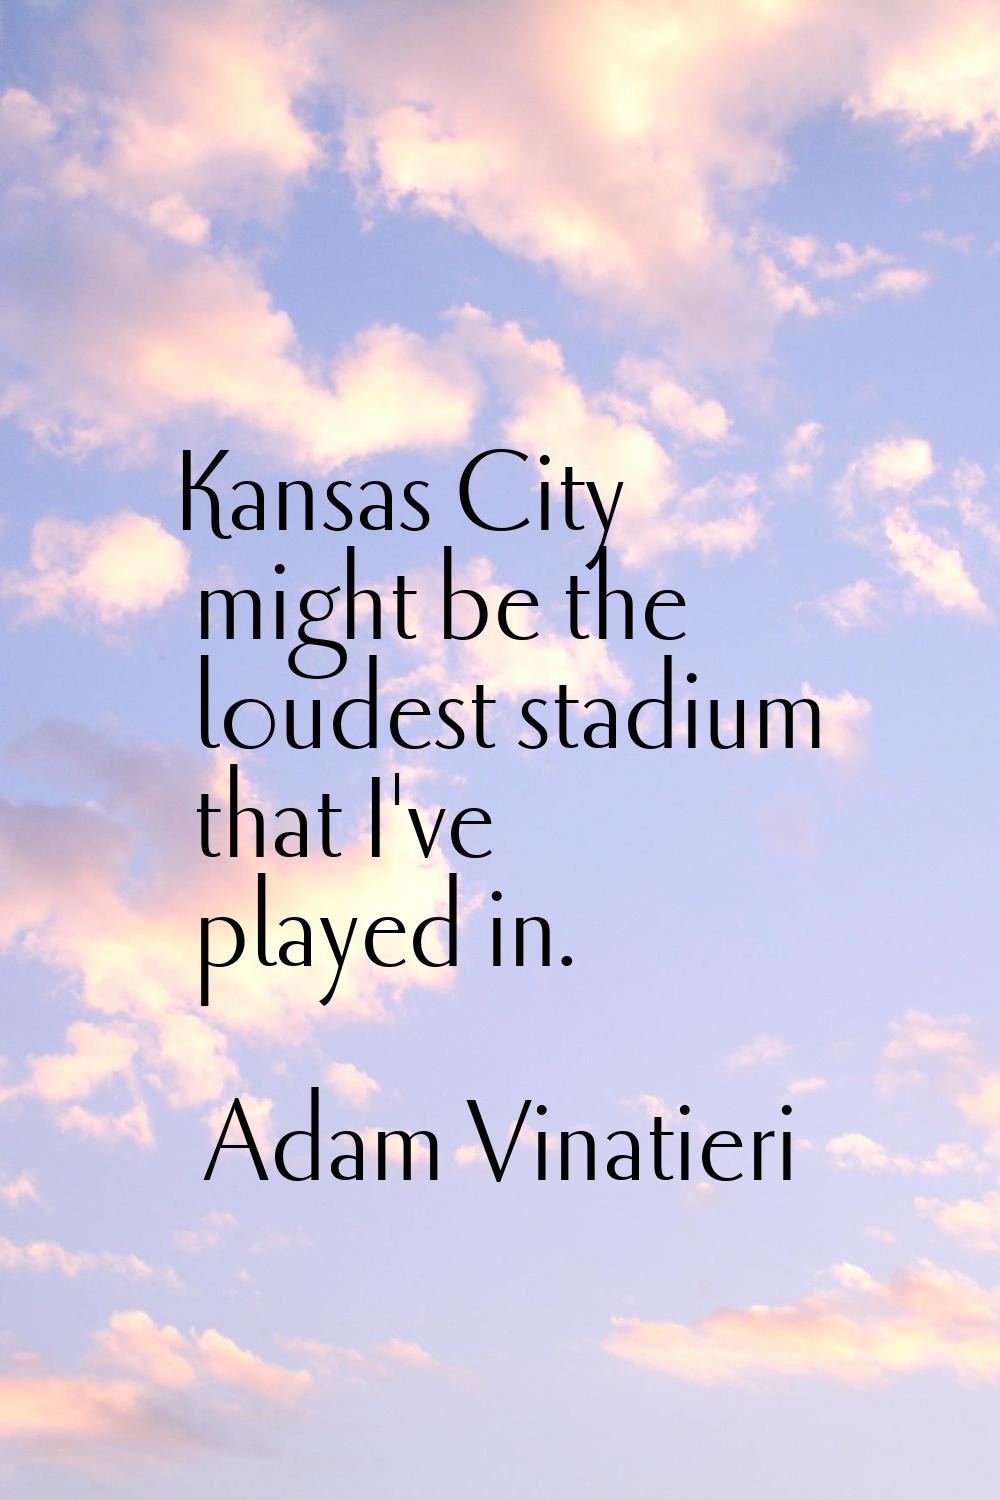 Kansas City might be the loudest stadium that I've played in.